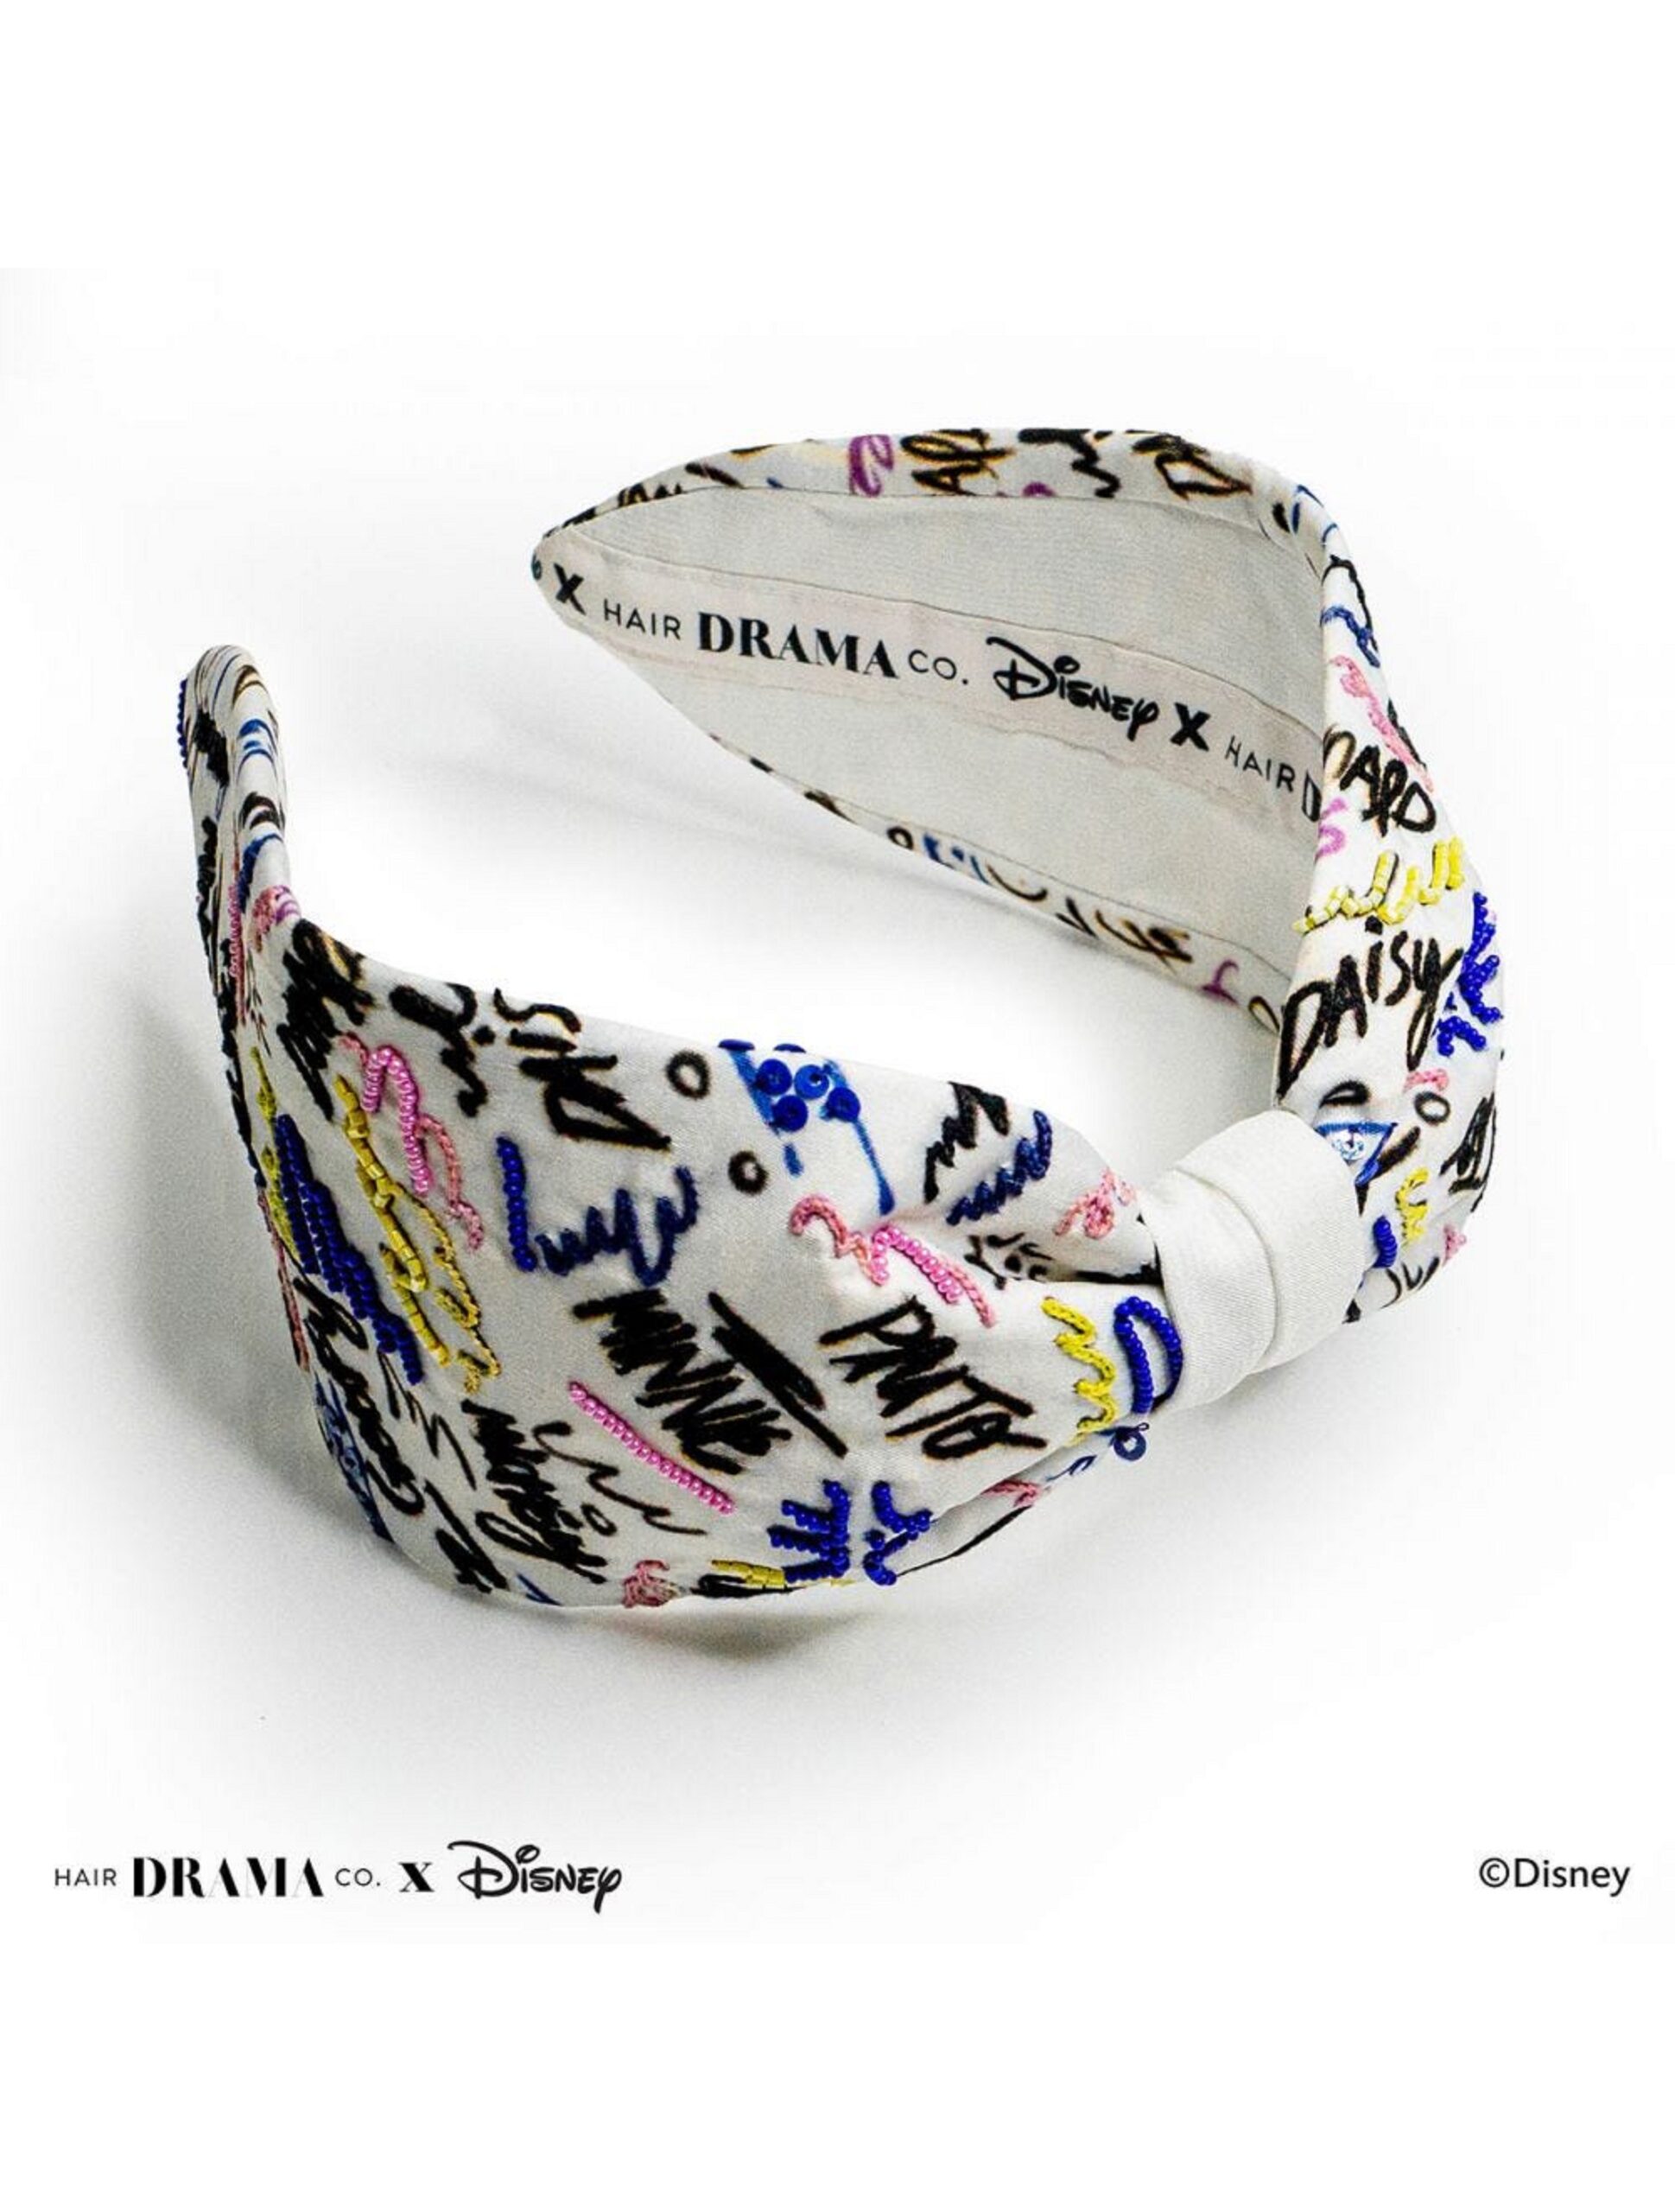 Disney Mickey Mouse & Friends Knotted Headband - INR 1800 available at shopDisney.in